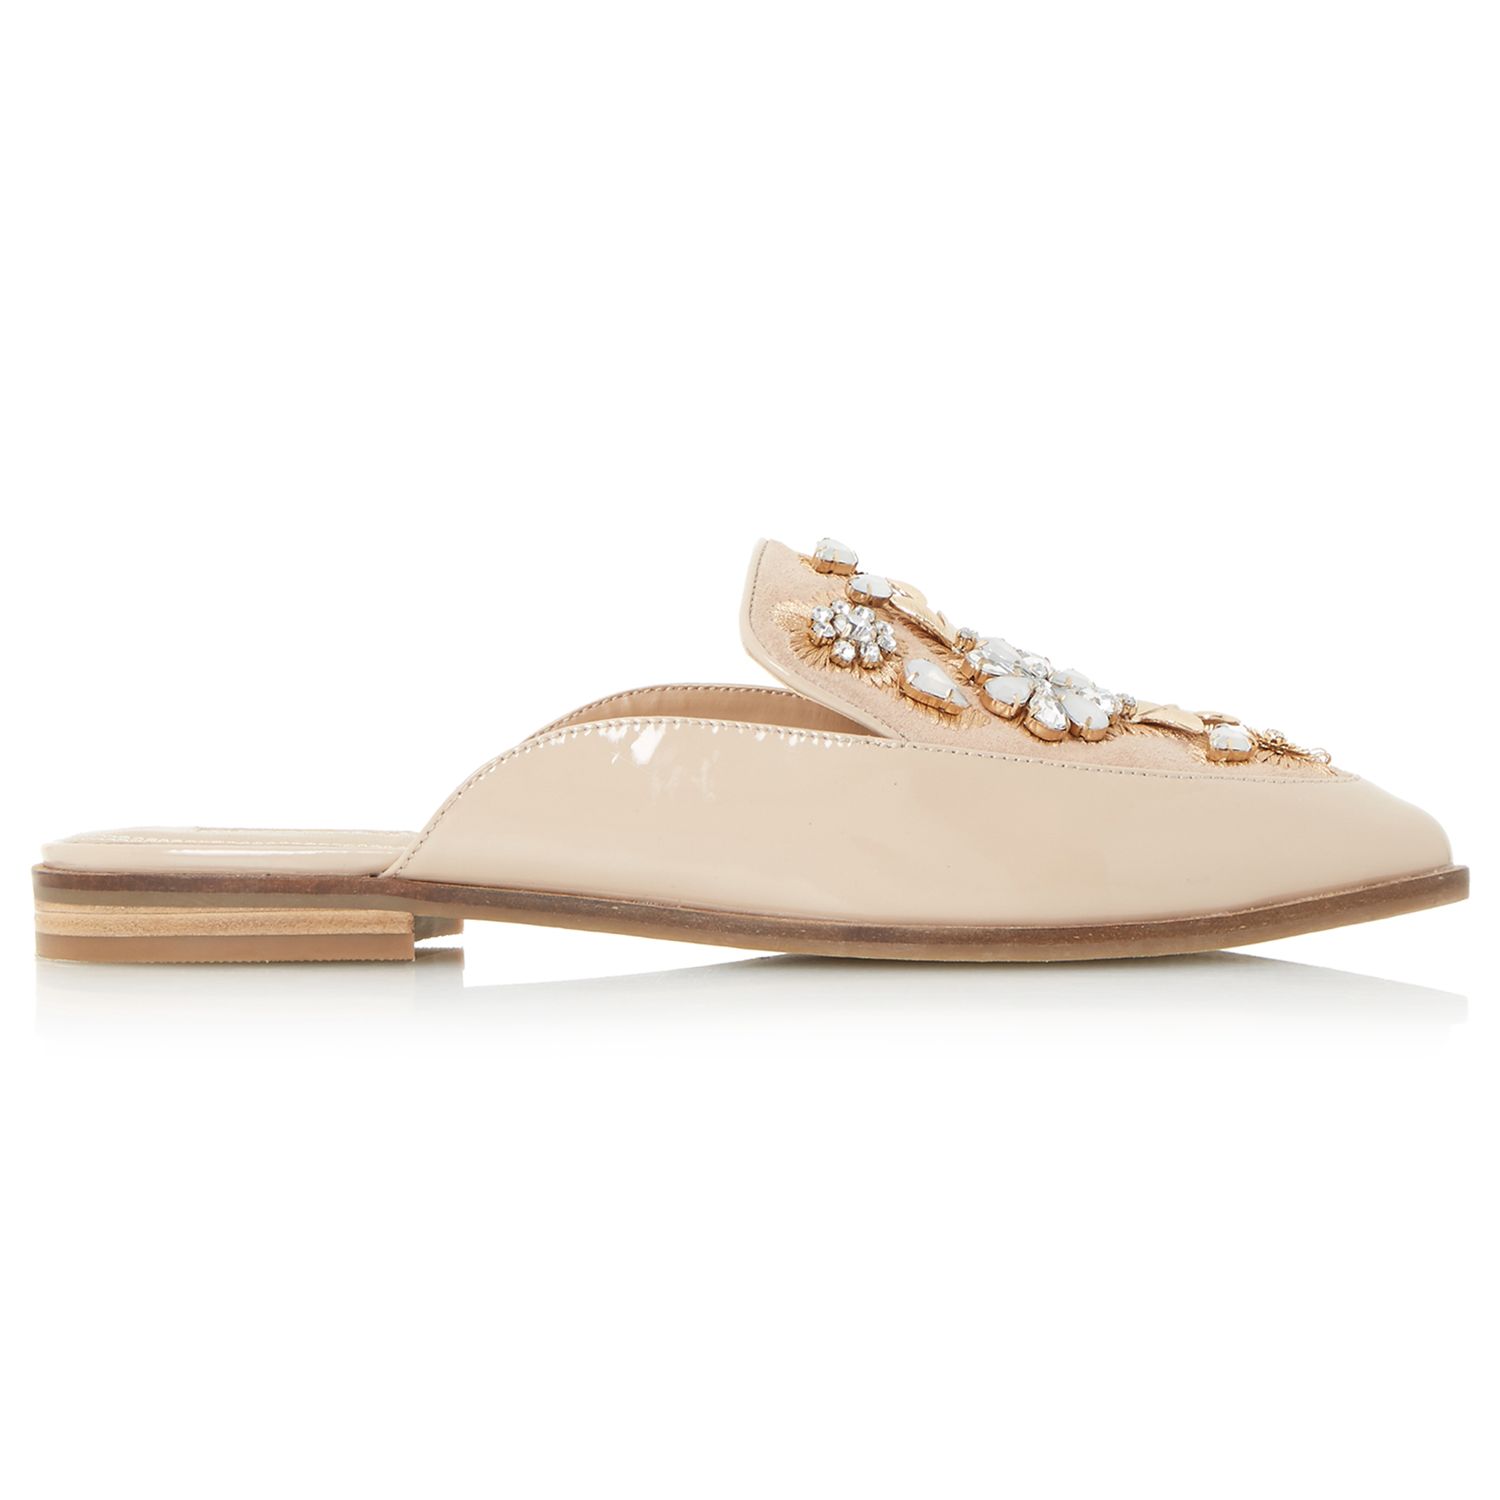 Dune Gemily Embellished Pointed Toe Mule Loafers, Nude, 7